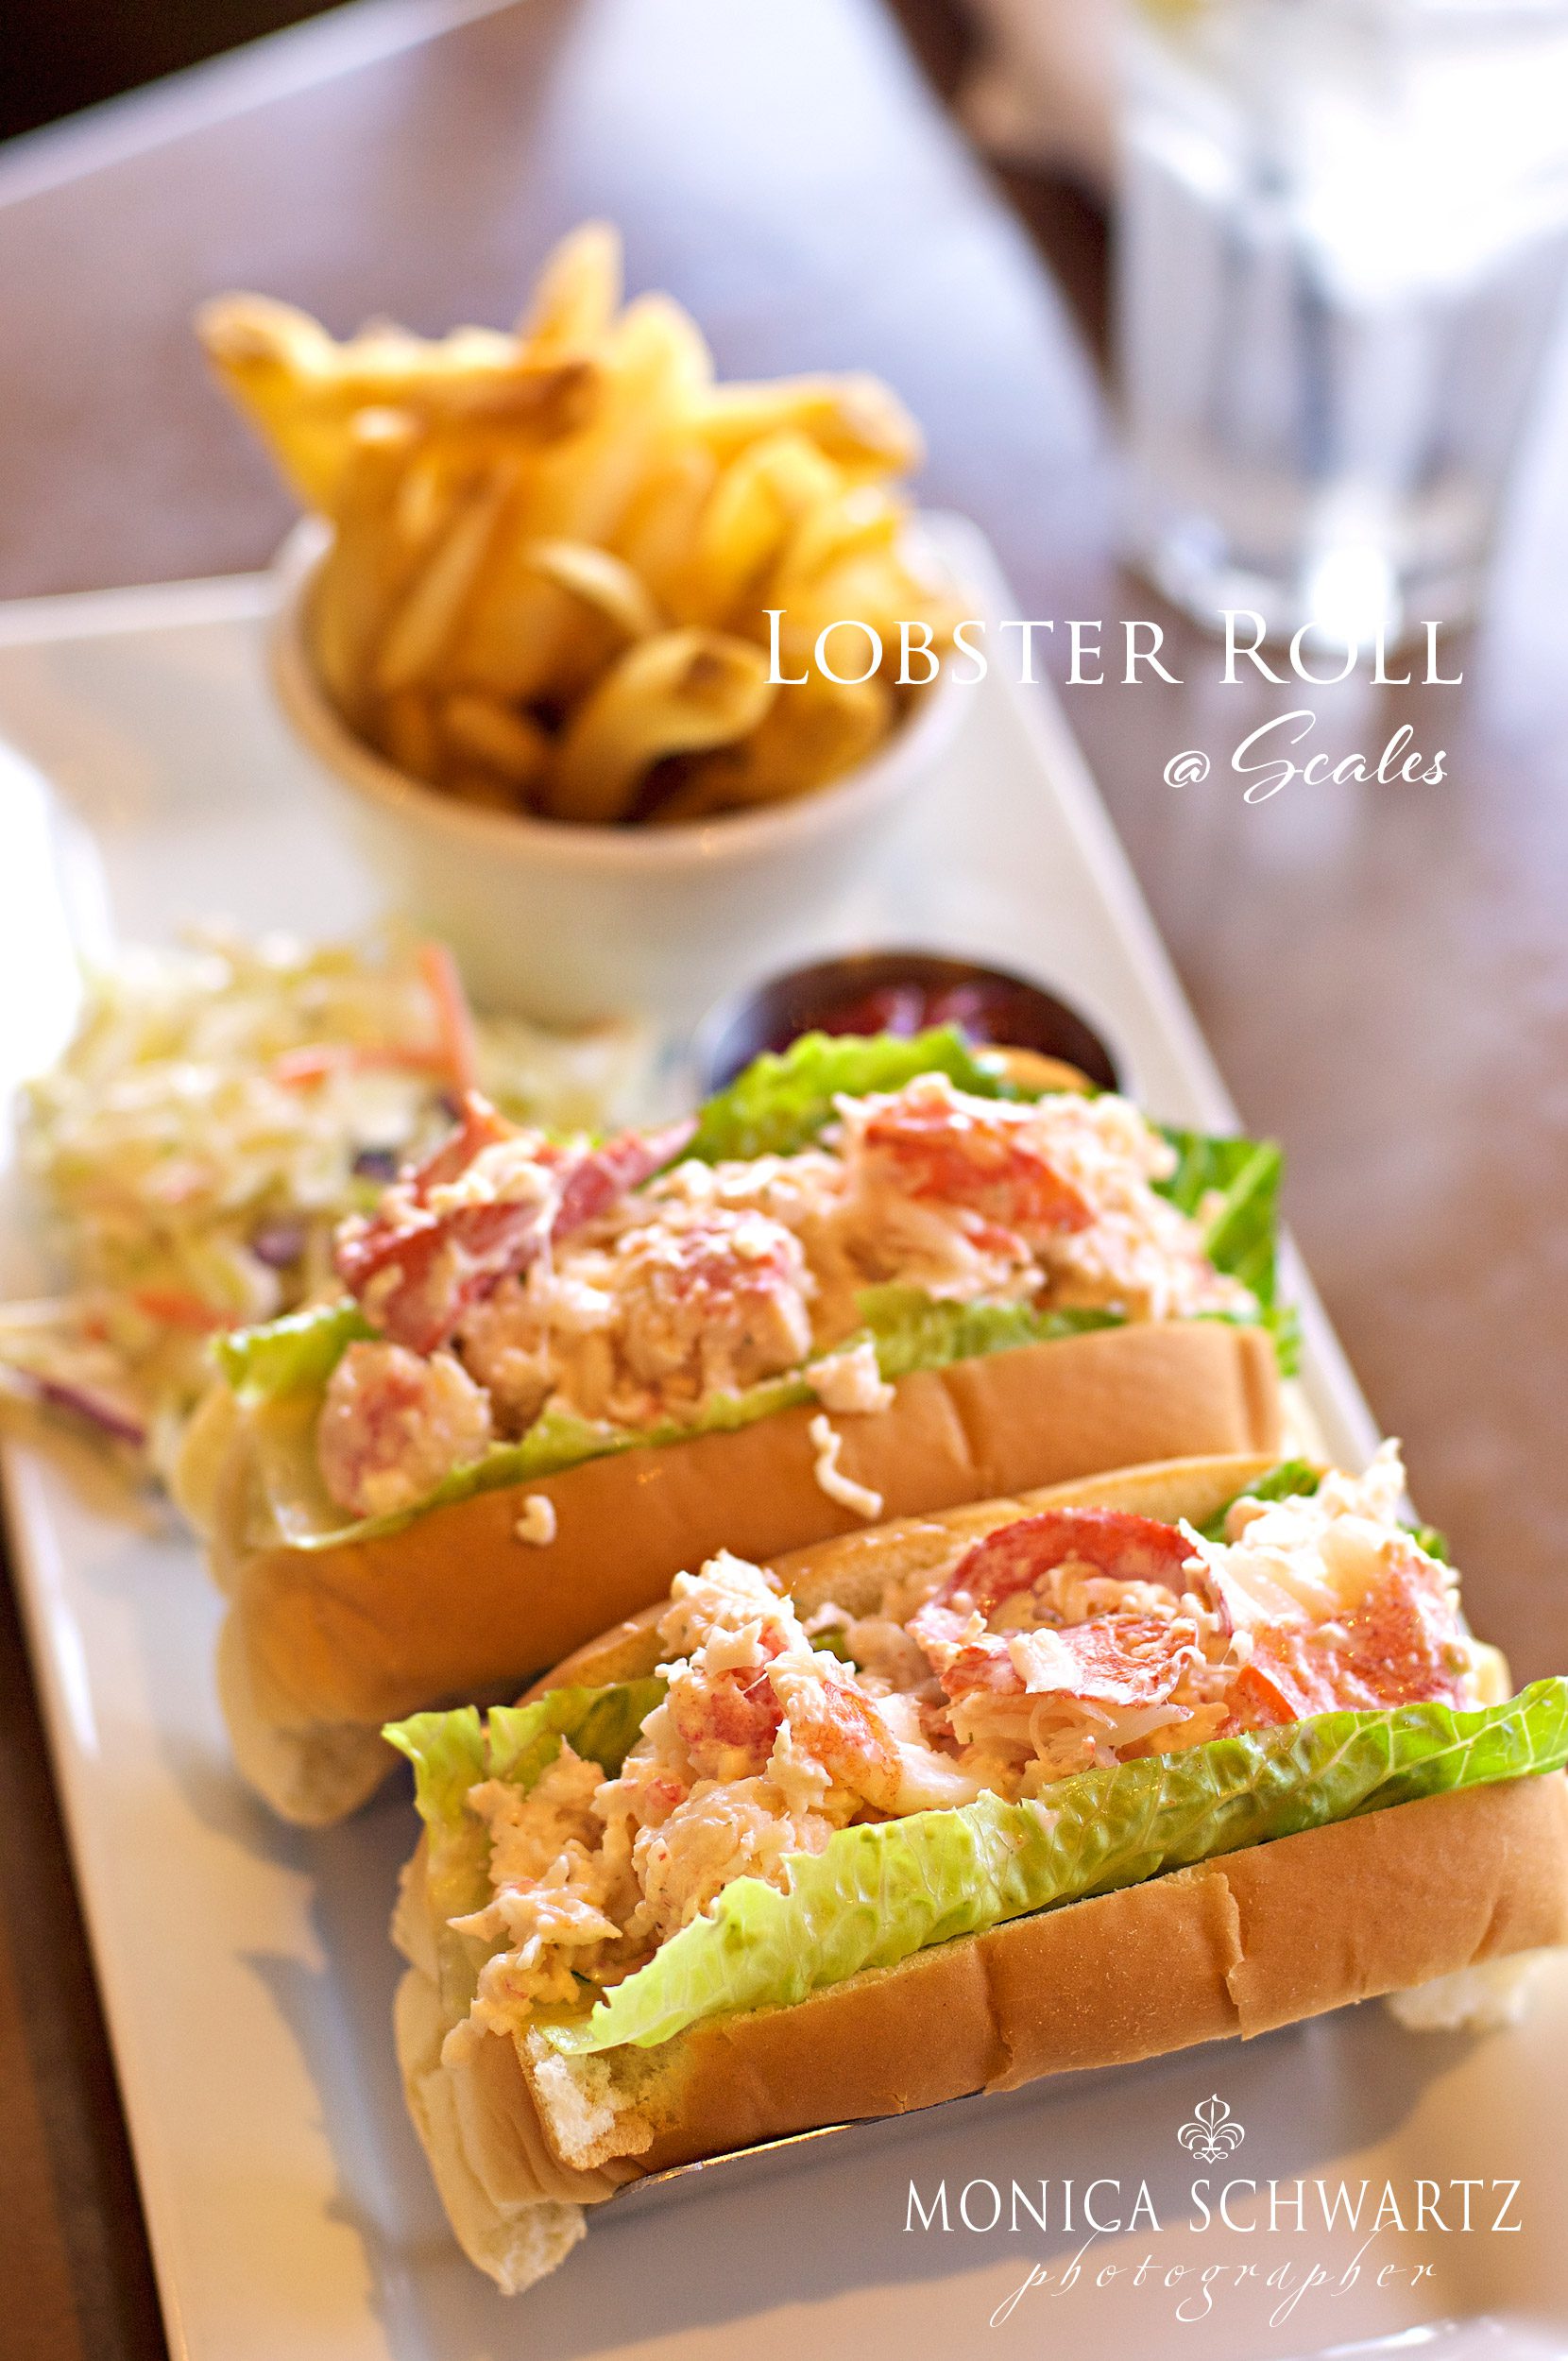 Lobster-Roll-at-Scales-Restaurant-at-Fishermans-Wharf-in-Monterey-California